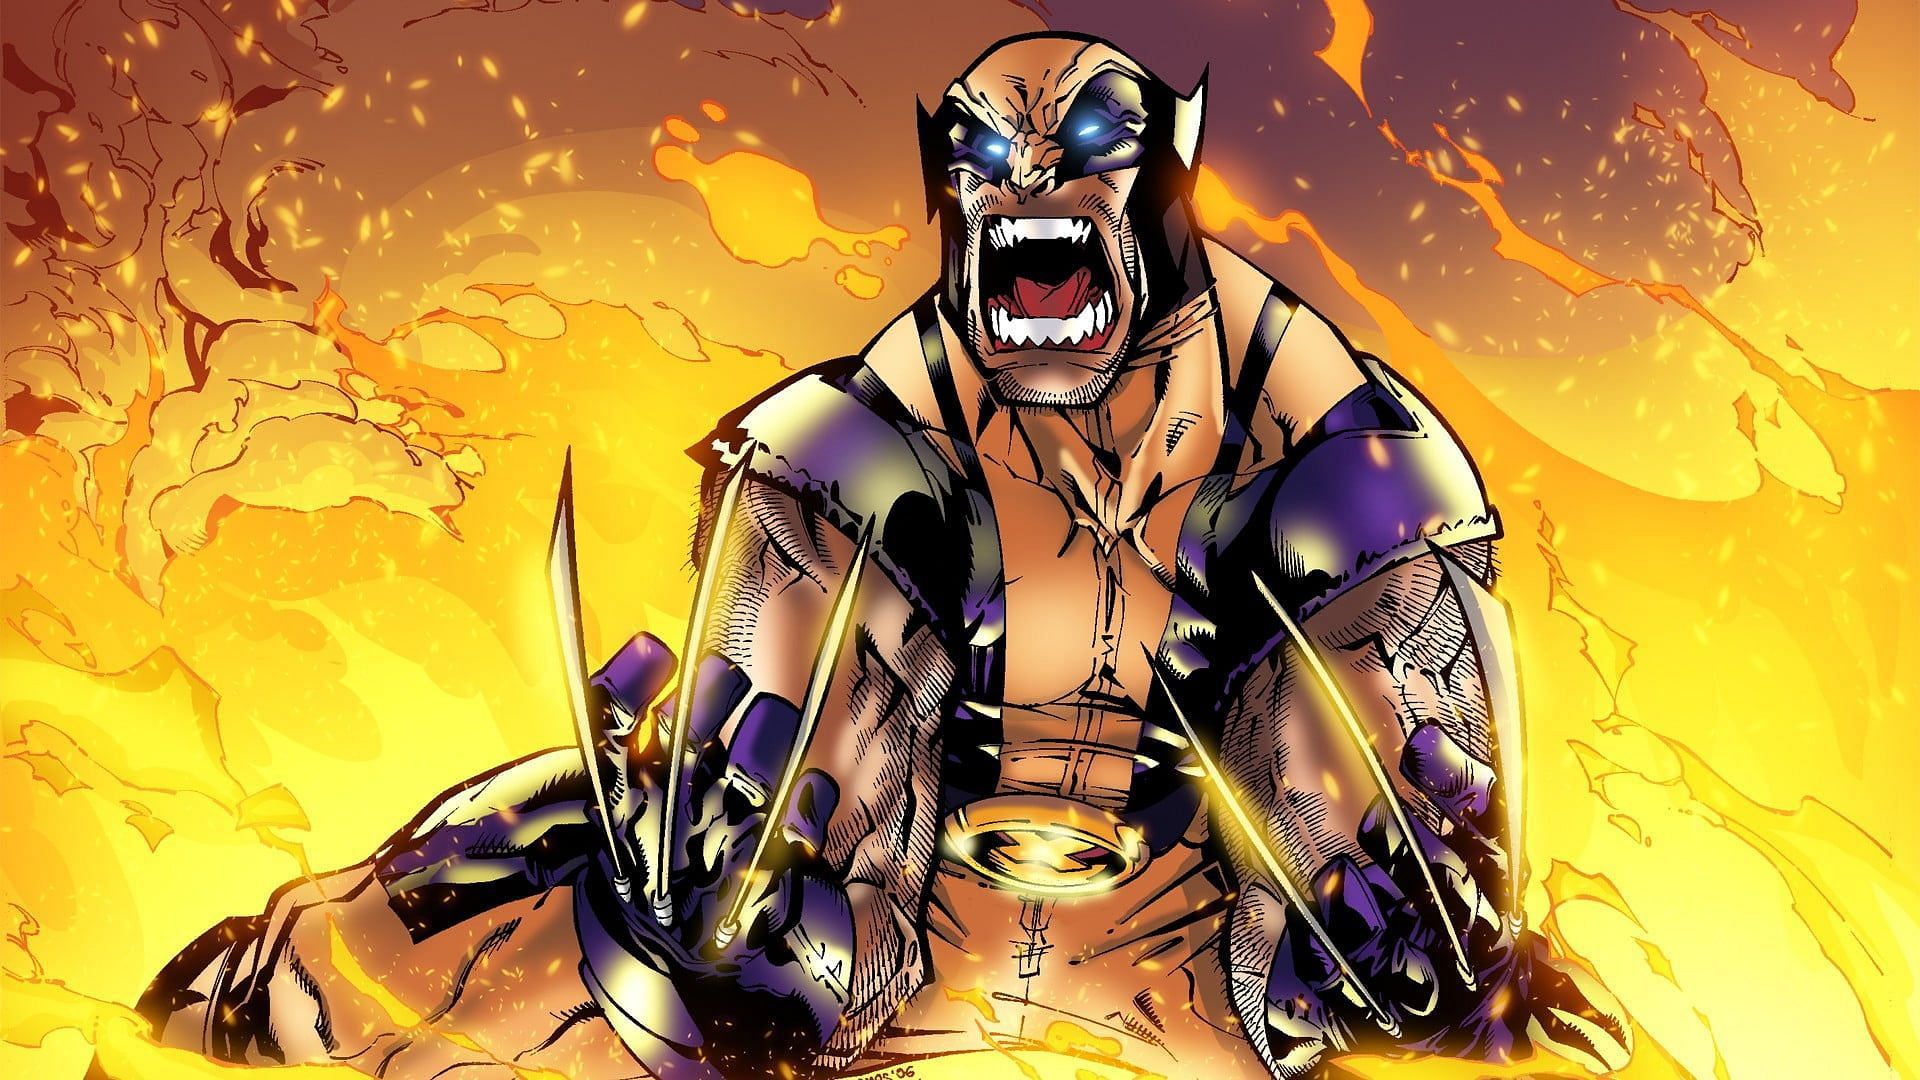 The Wolverine as he appeared in the comics (Image via Marvel)